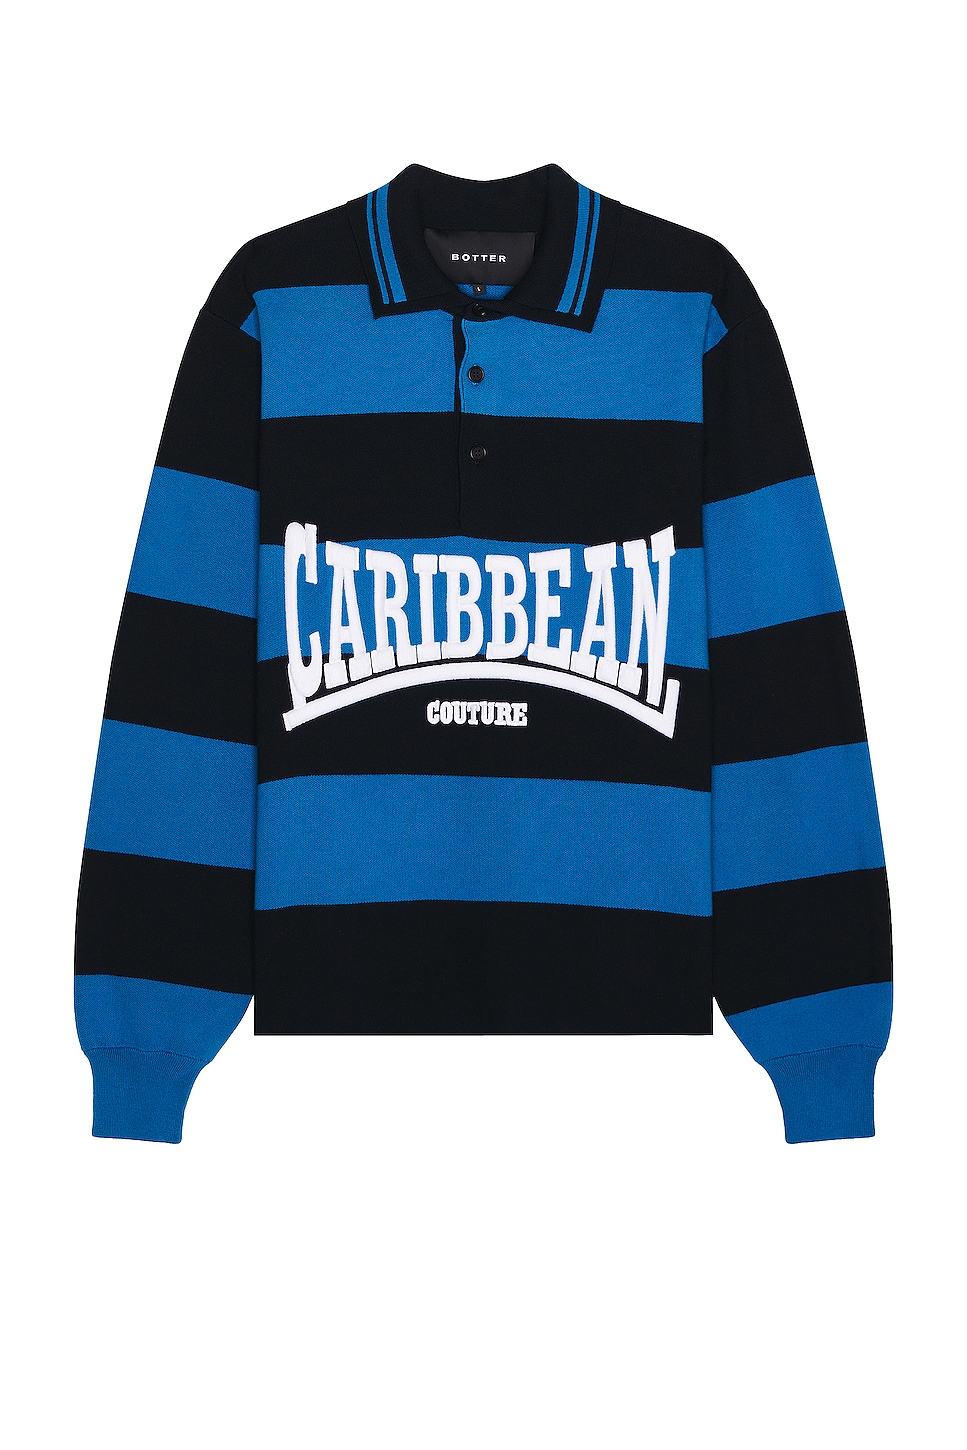 Image 1 of BOTTER Caribbean Couture Polo in Blue Dark Navy Stripe